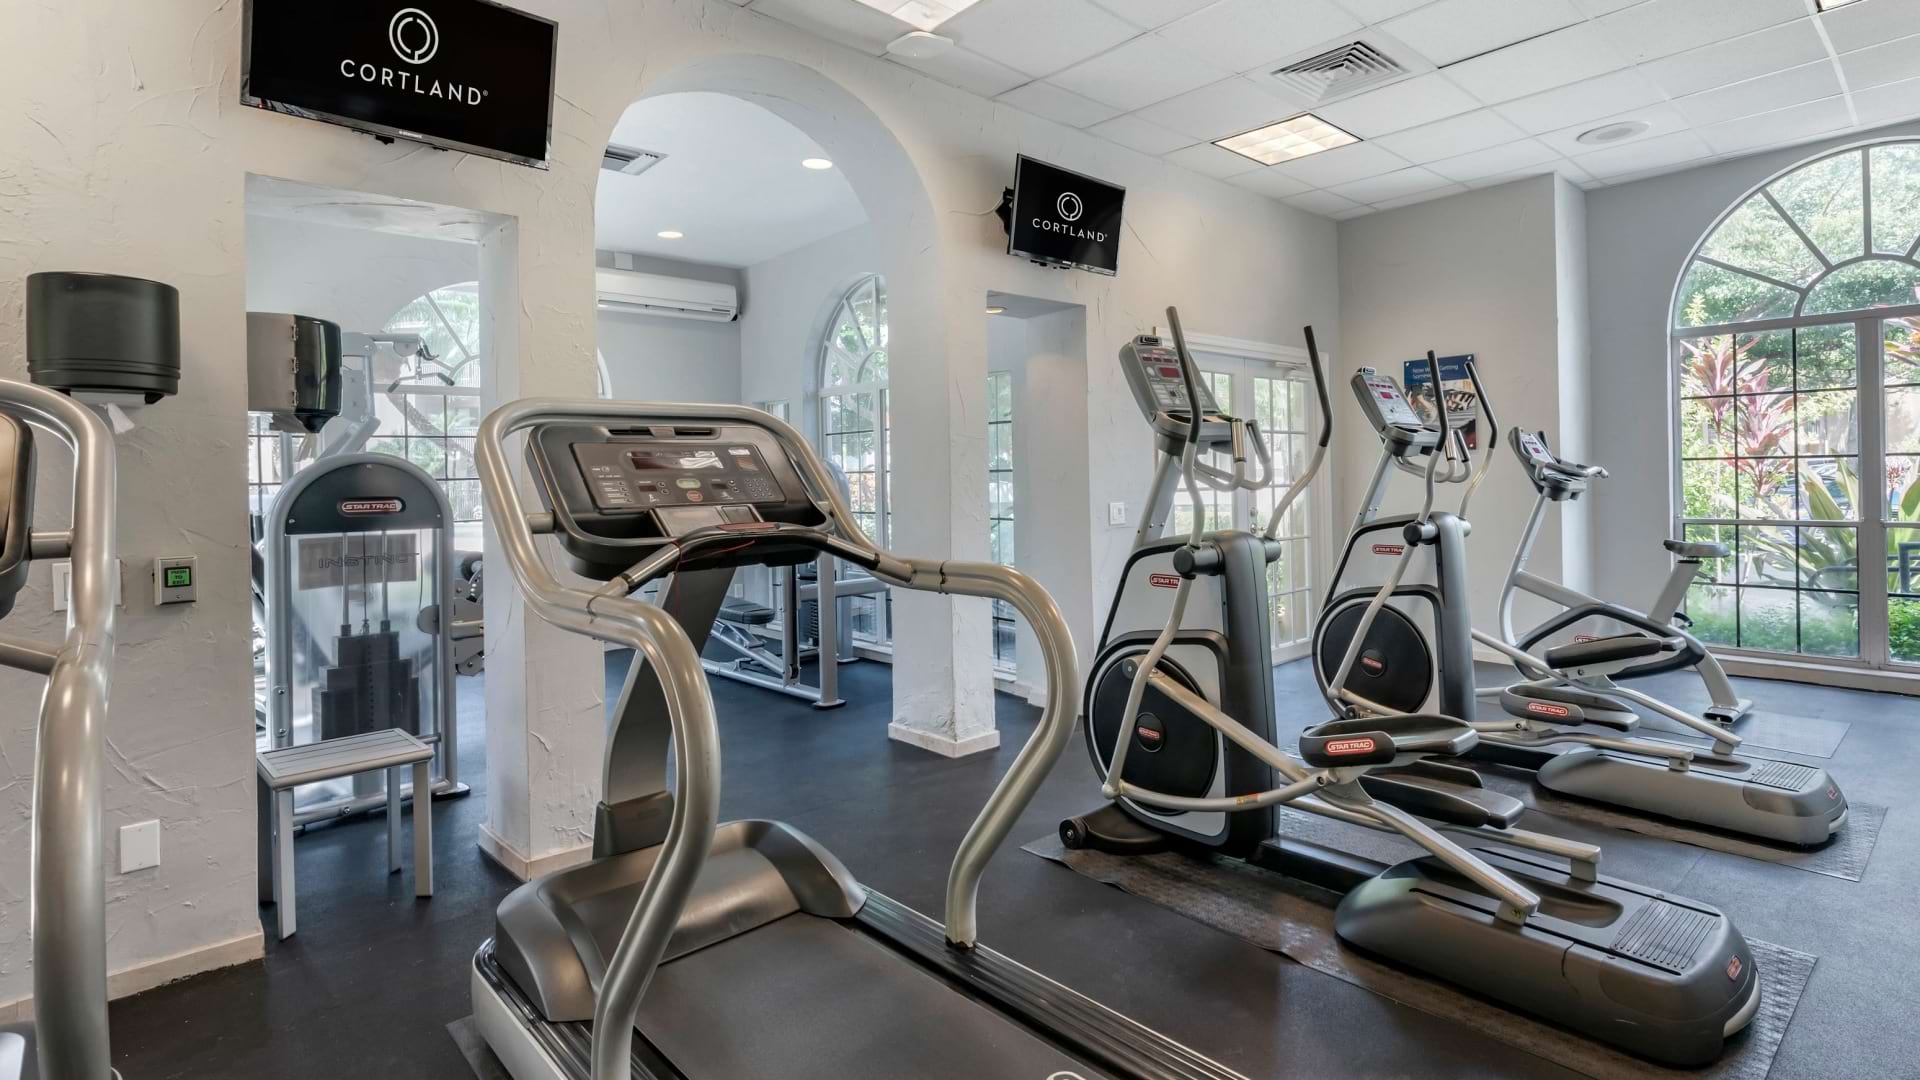 Cardio Machines and HDTVs at Our West Kendall Apartment Gym